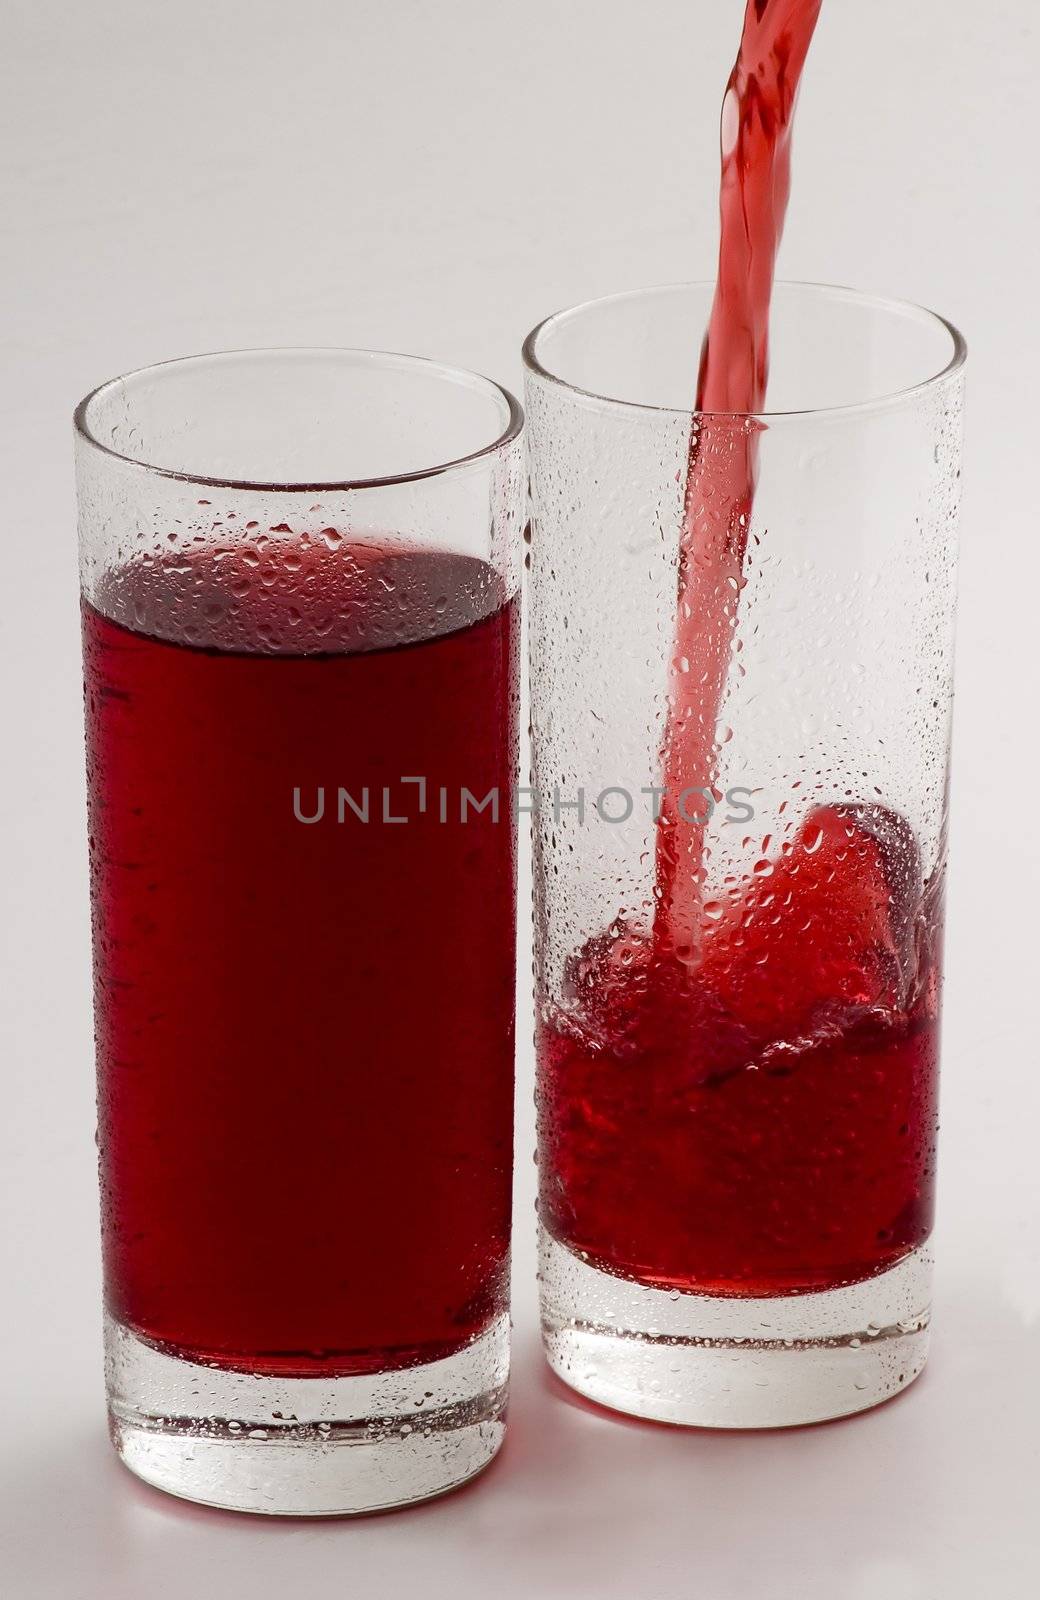 Glass glasses with a red drink